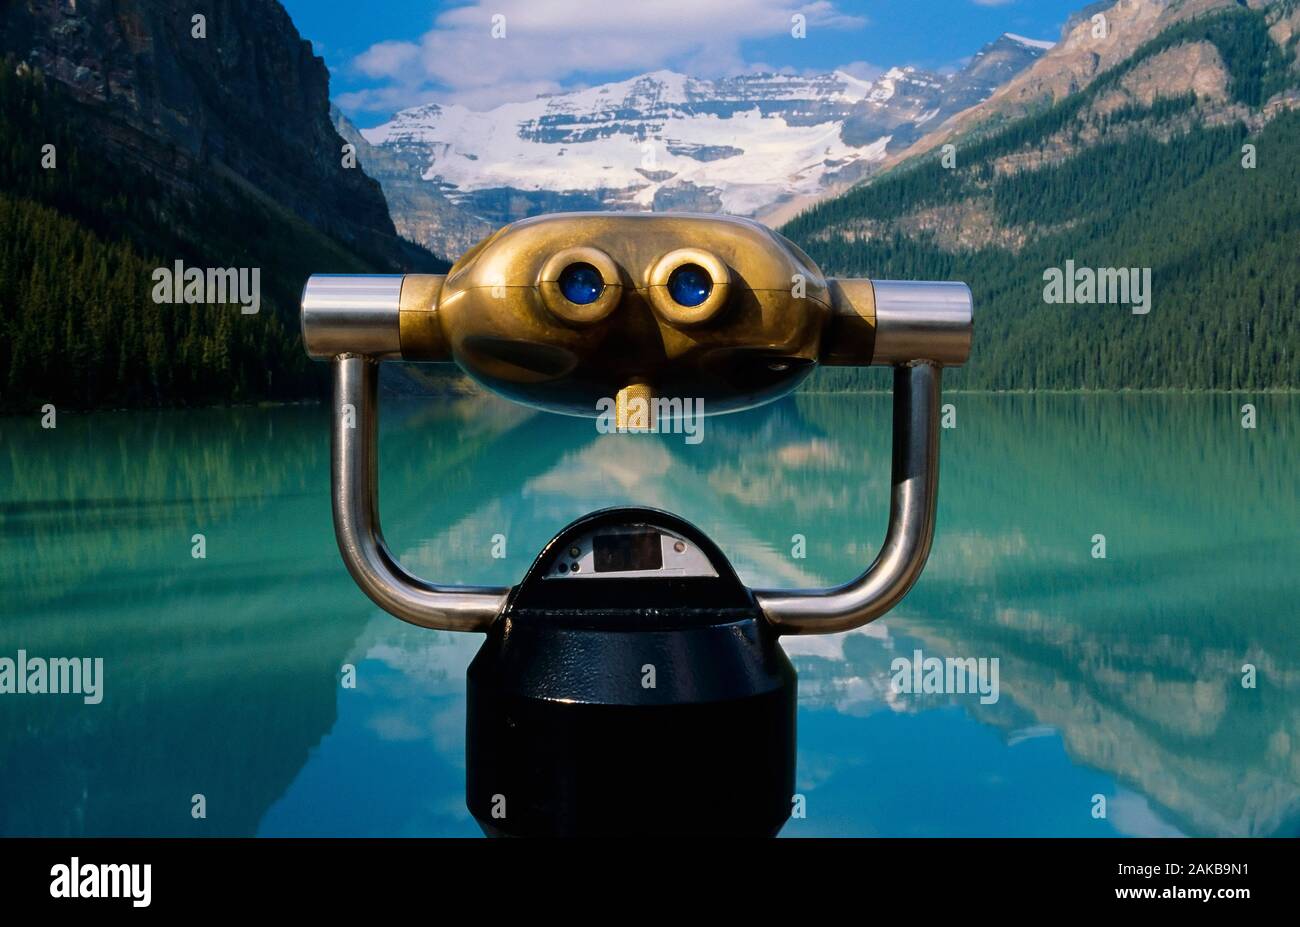 Coin-operated binoculars on shore of Lake Louise, Banff National Park, Alberta, Canada Stock Photo